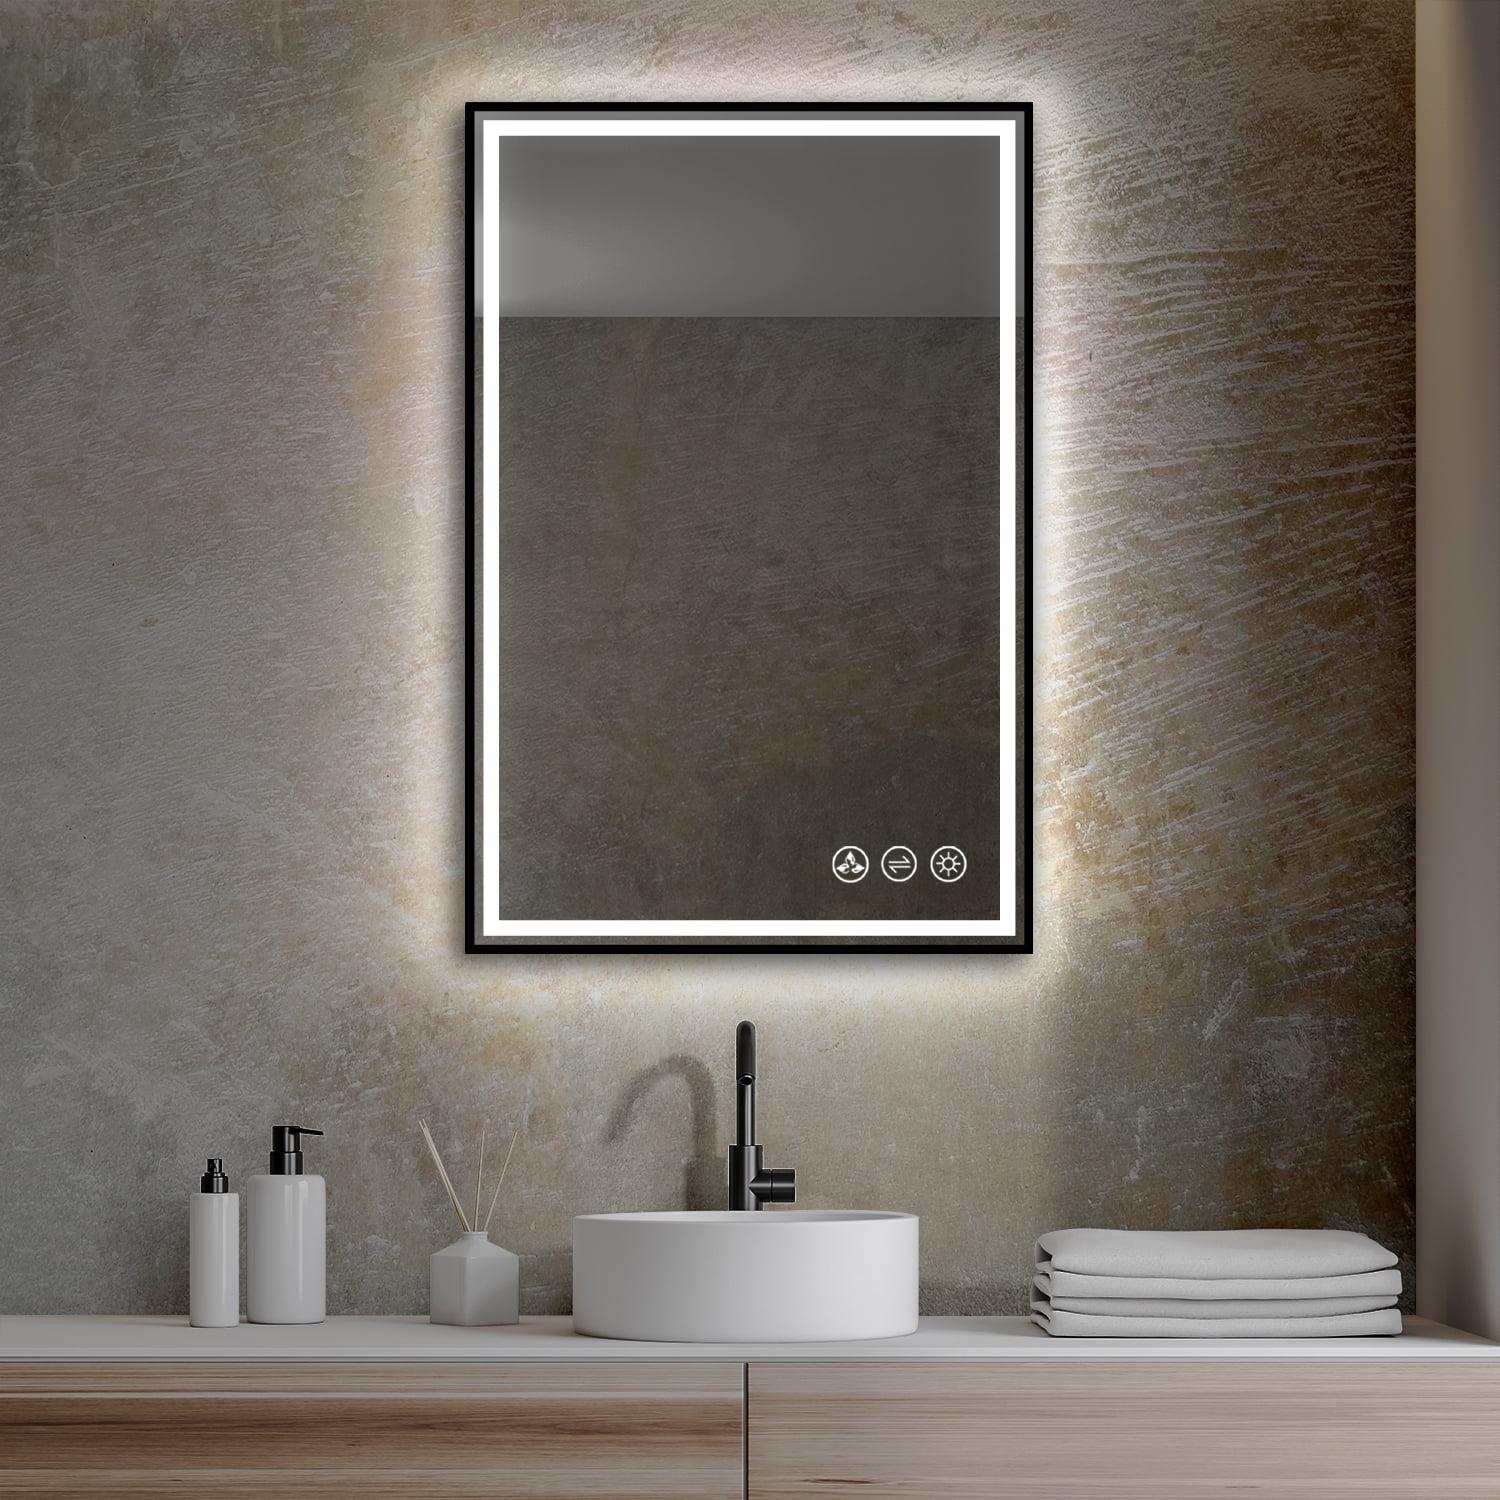 Elegant 24x36 Rectangular Vanity Mirror with Adjustable LED Lighting, Silver and Gold